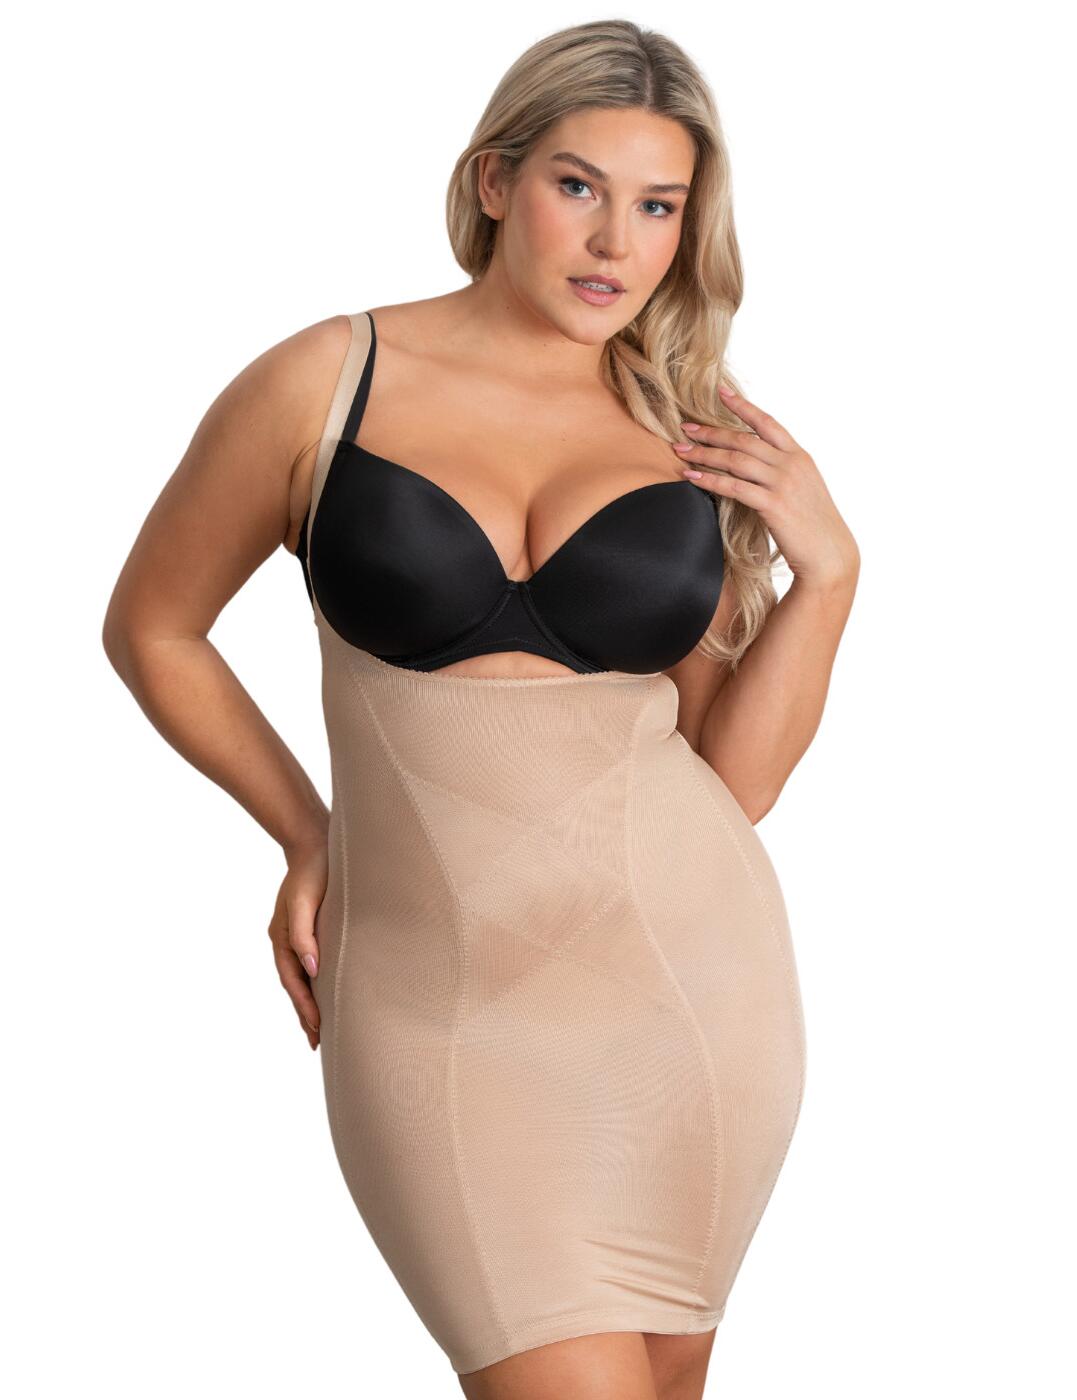 Pour Moi Hourglass Firm Control Wear Your Own Bra Slip - Belle